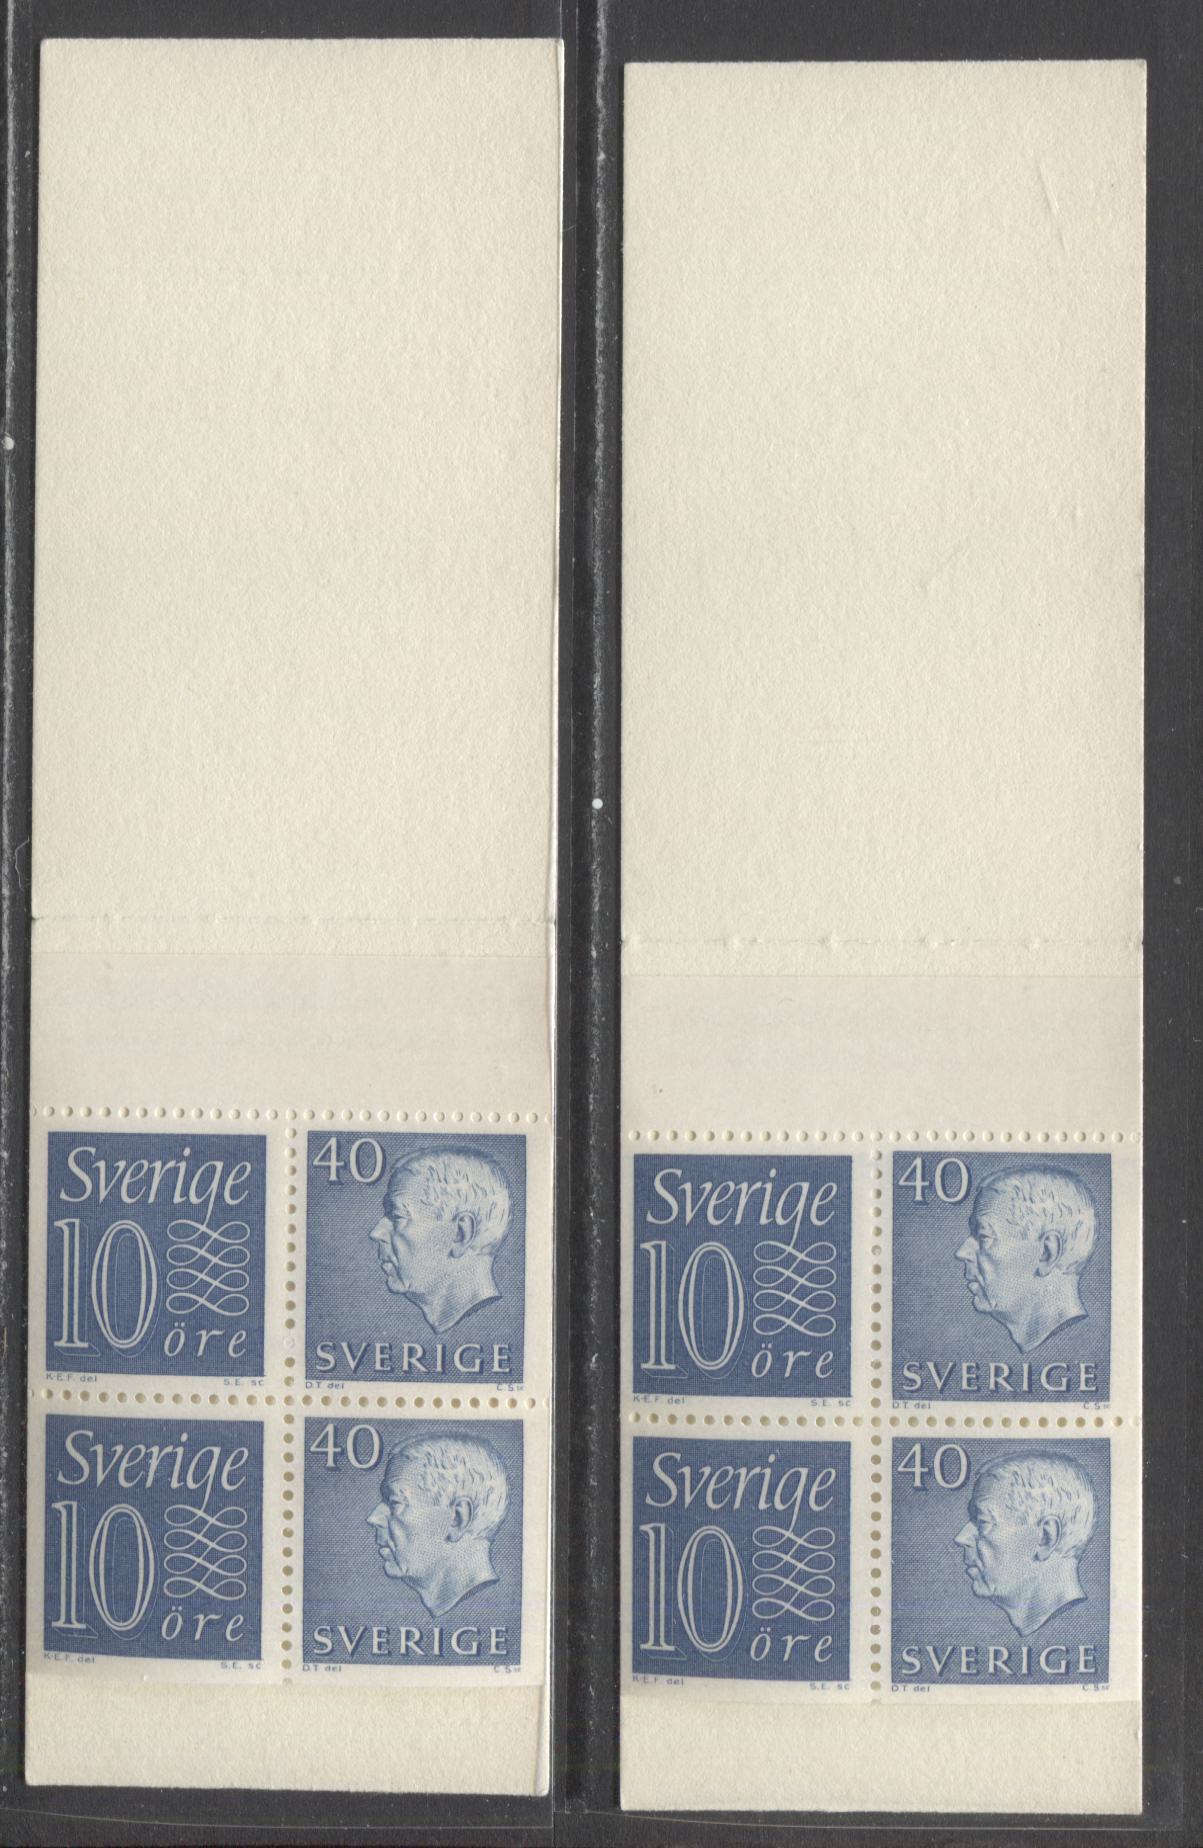 Lot 191 Sweden SC#669b (Facit #HA12ARV)/669b (Facit #HA12B1RV) 1964 Re-Engraved King Gustav VI Adolf Definitive Issue, Upright Panes, Stamps Out Of Vertical Alignment, Two Slightly Different Shades, 2 VFNH Booklets of 4 (2 +2),  Estimated Value $5